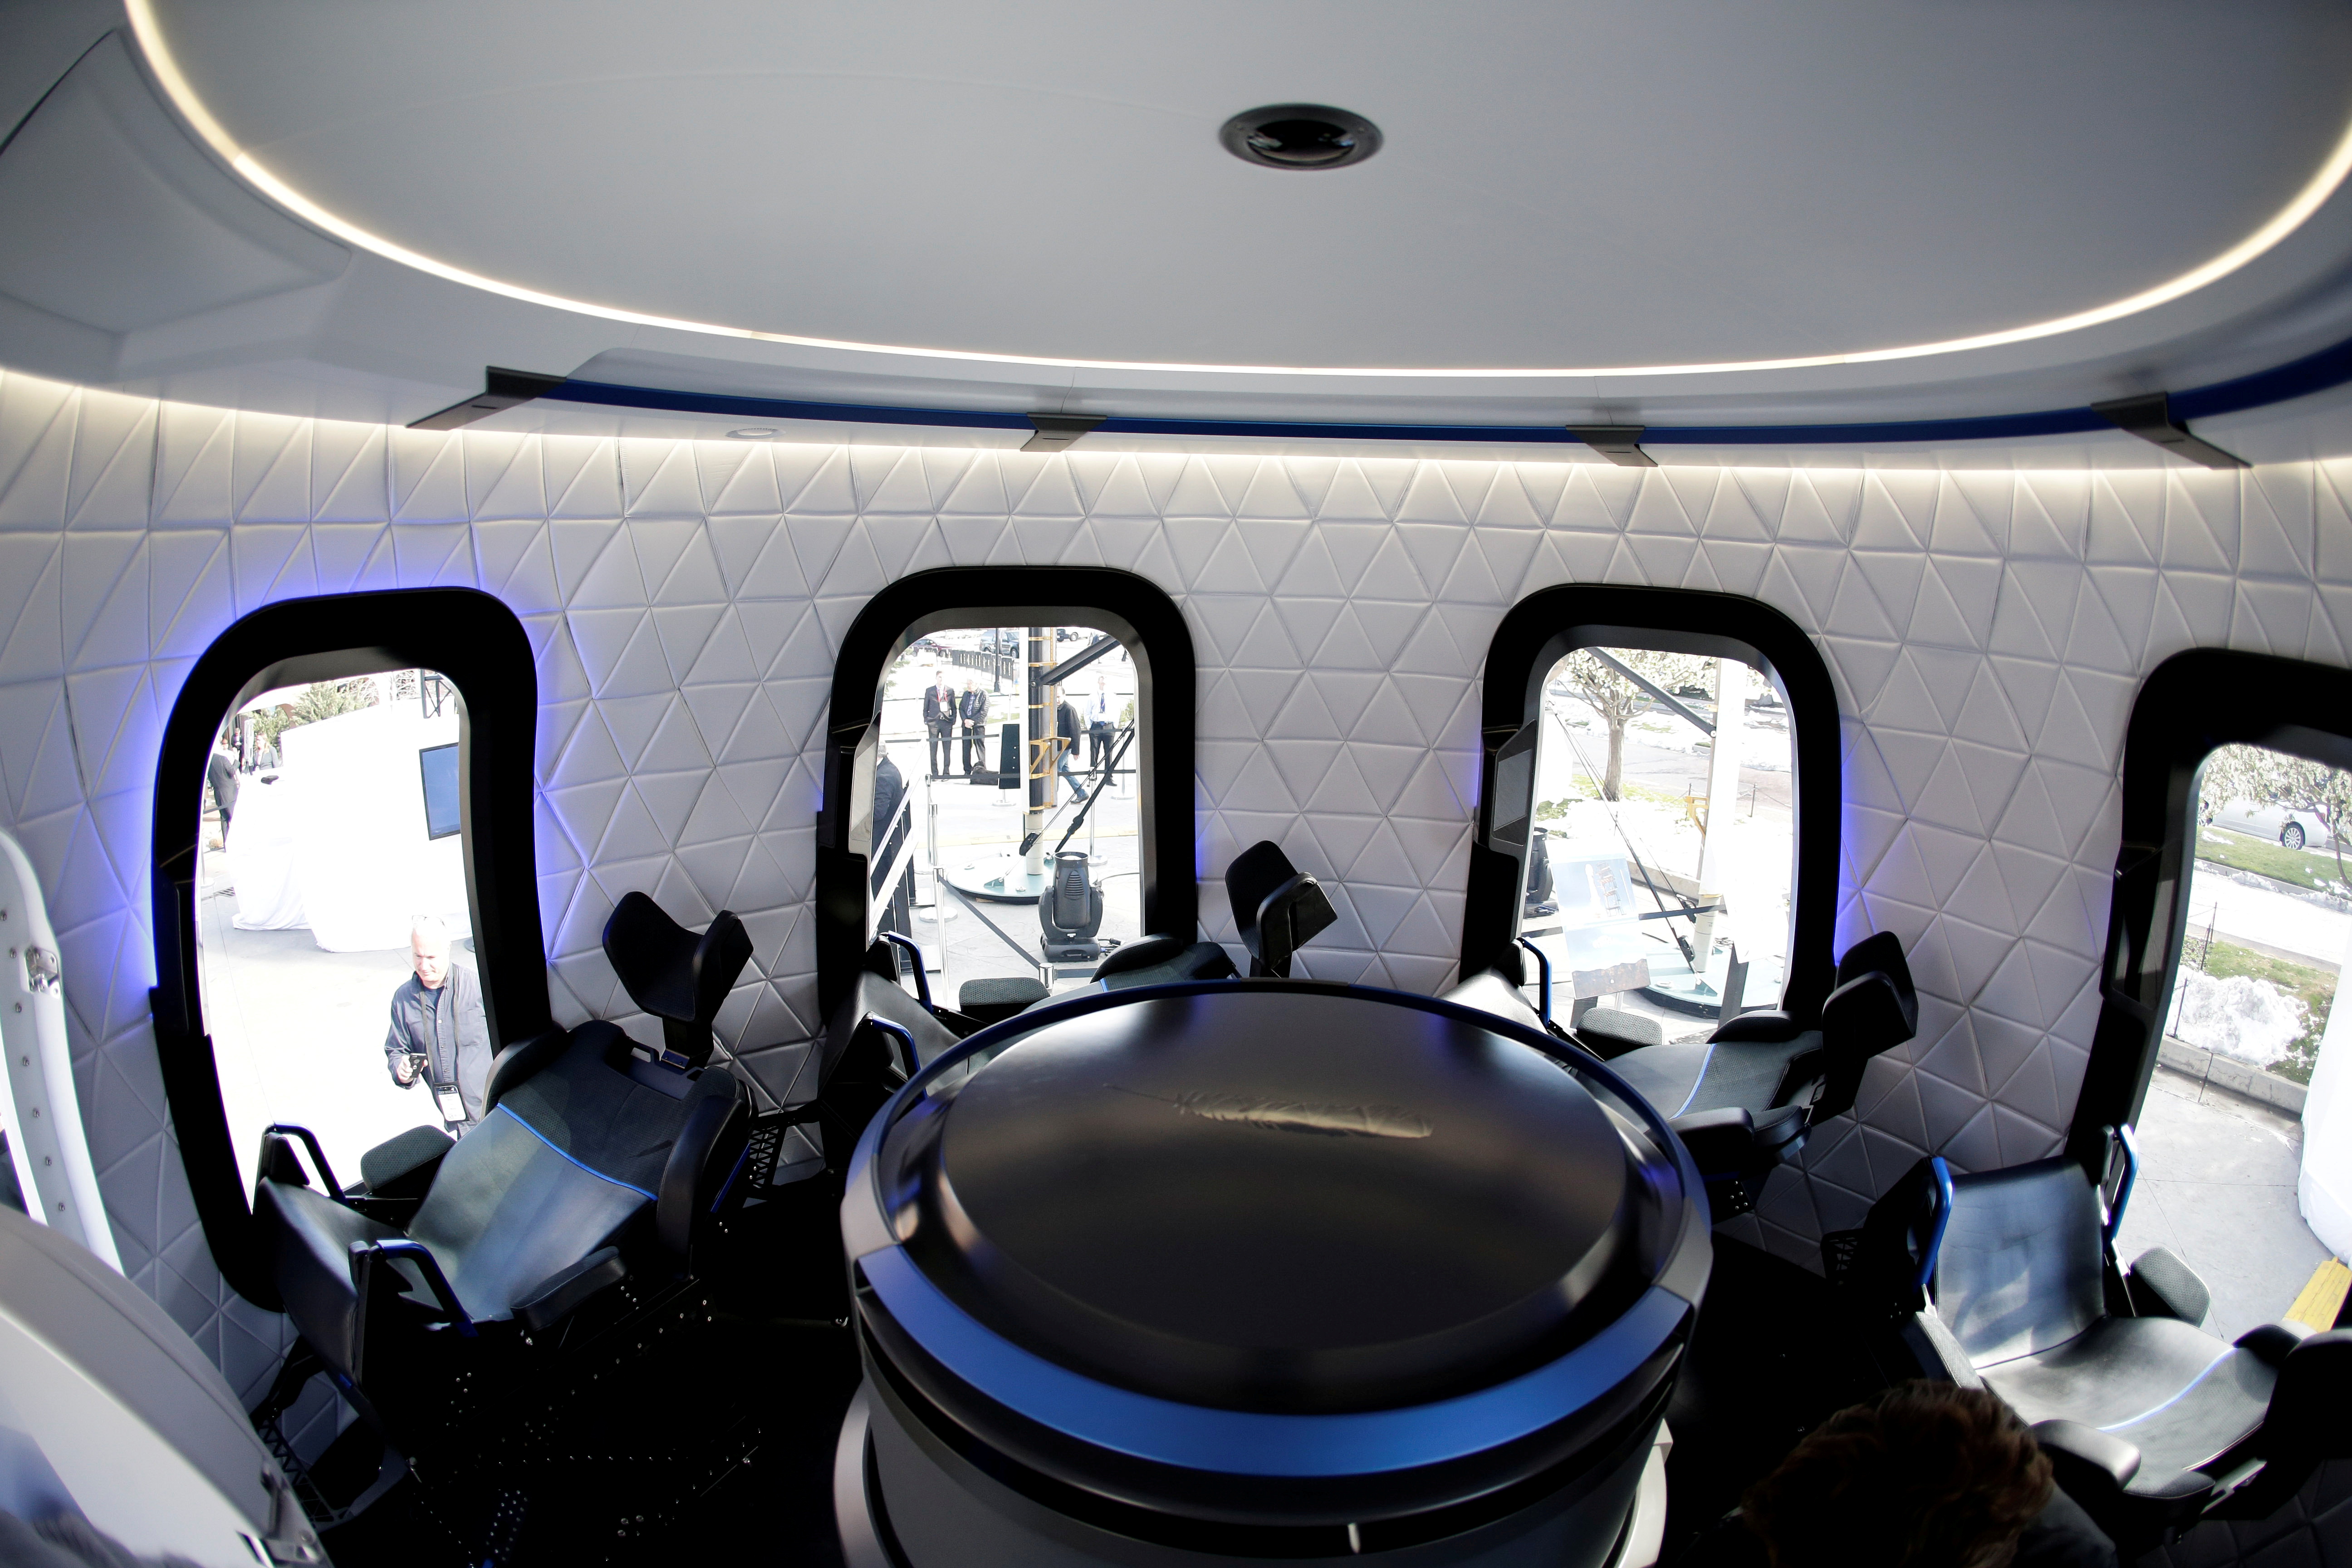 An interior view of the Blue Origin Crew Capsule mockup at the 33rd Space Symposium in Colorado Springs, Colorado, United States April 5, 2017. REUTERS/Isaiah J. Downing/File Photo